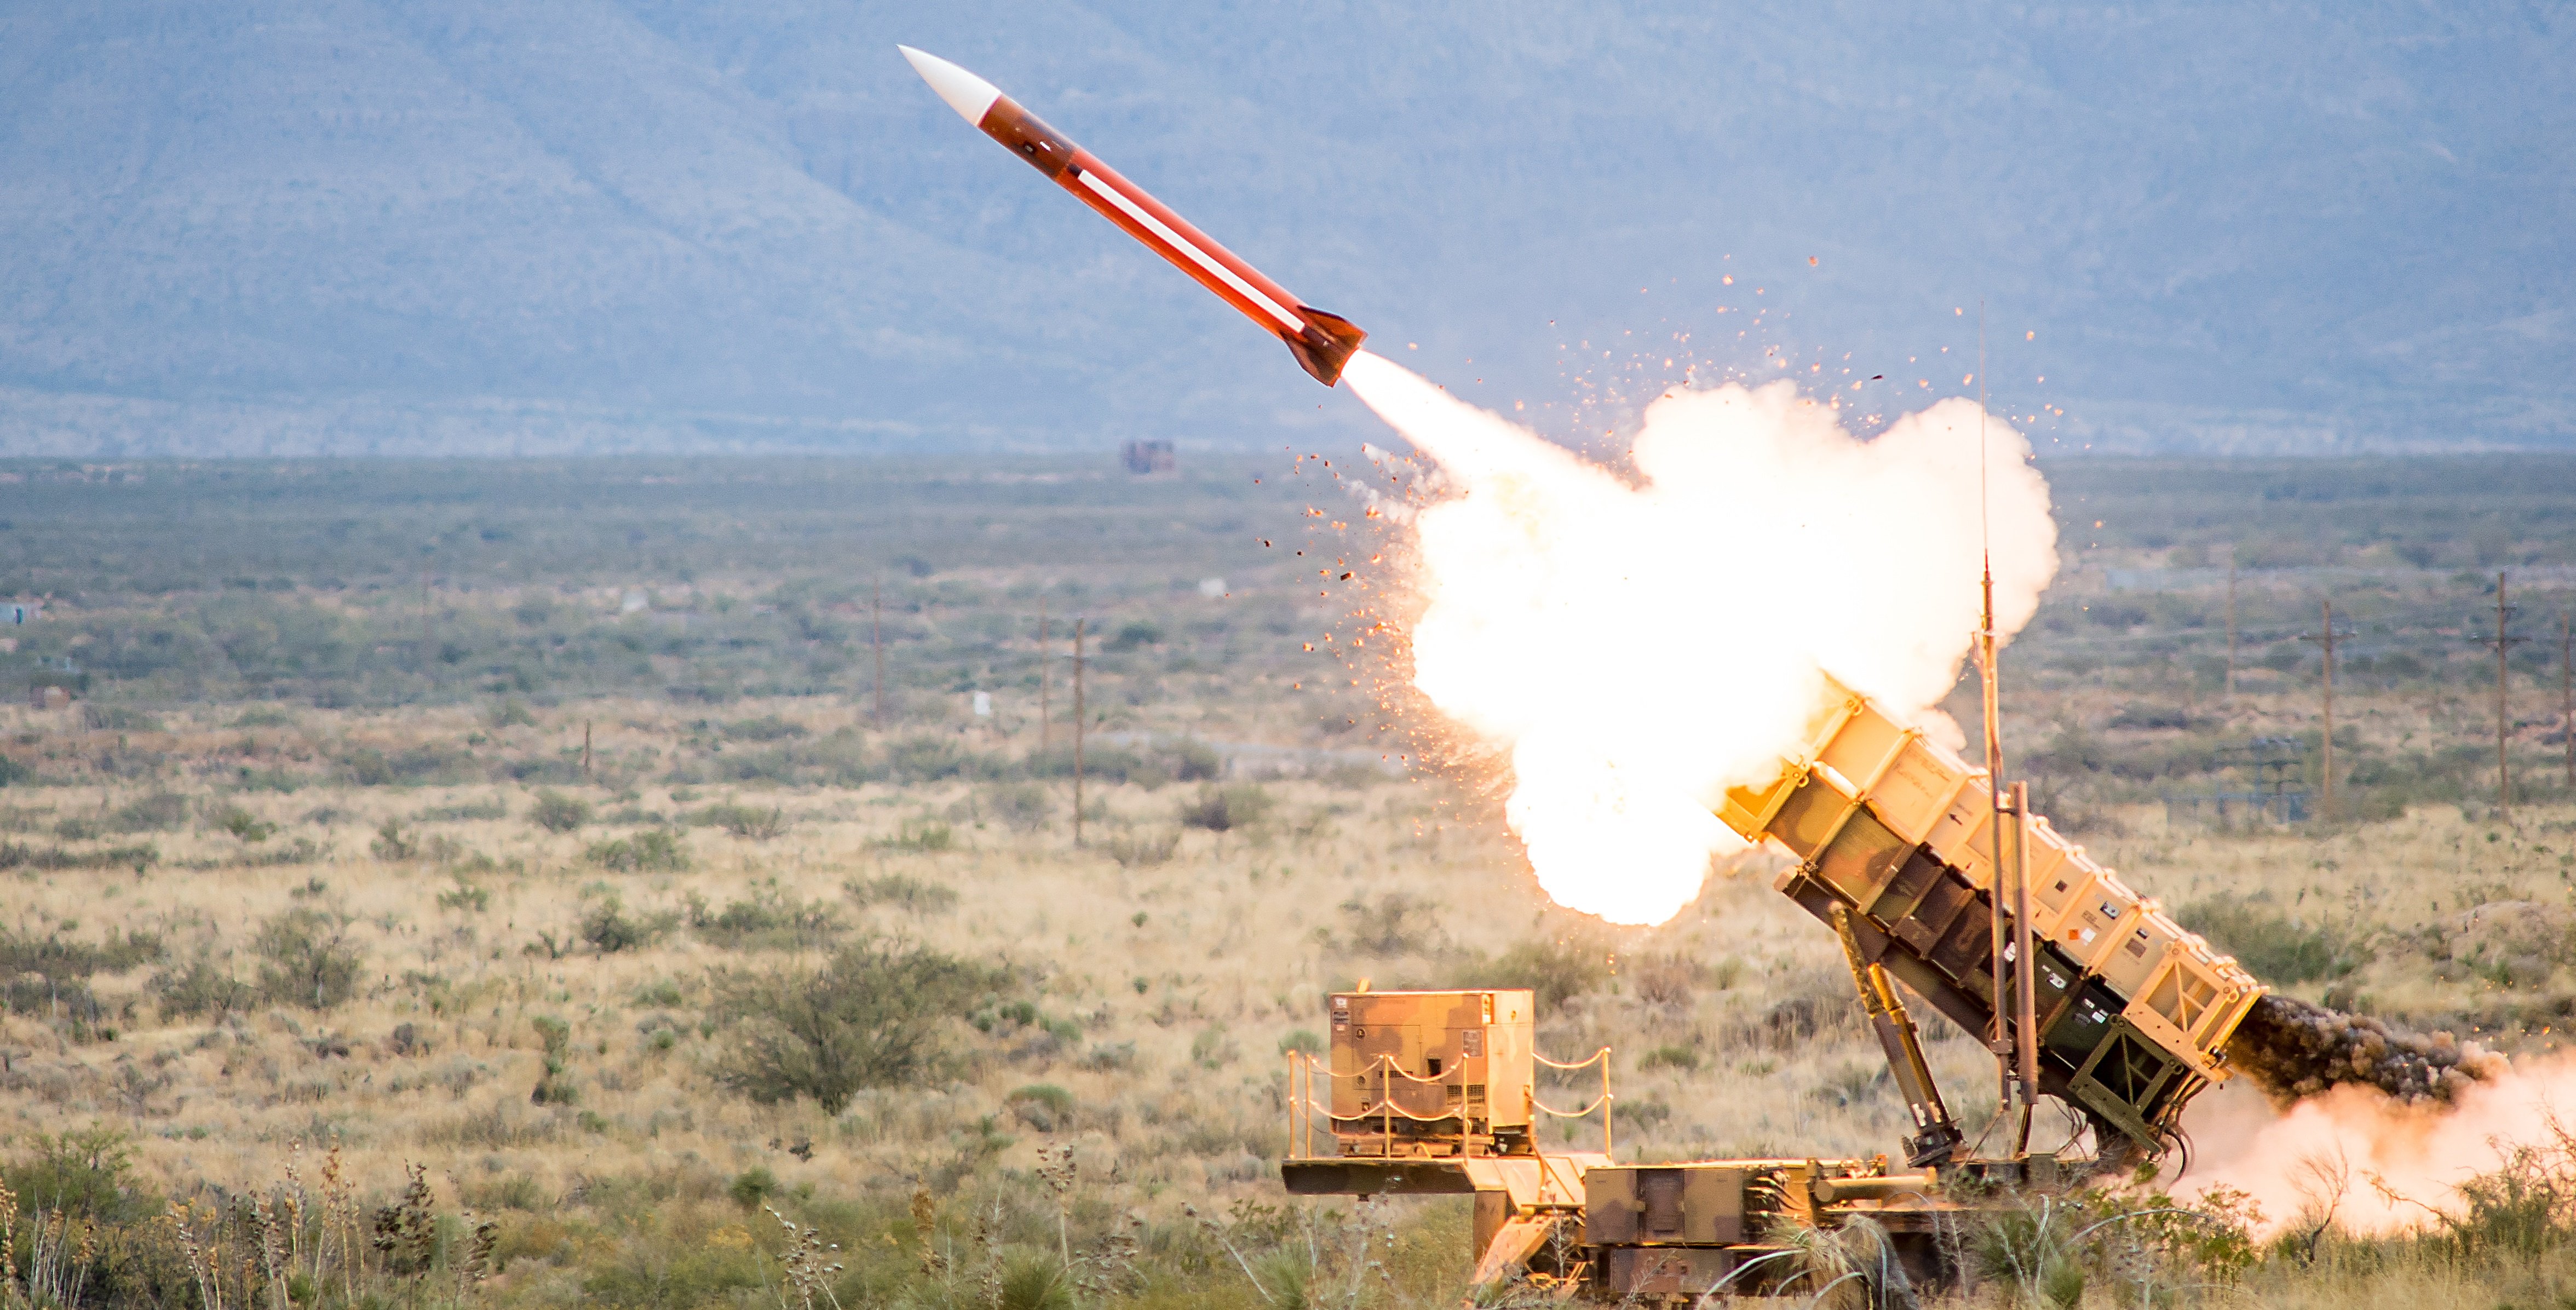 Us Army Upgrades Patriot Missile To Kill Multiple Threats The National Interest 